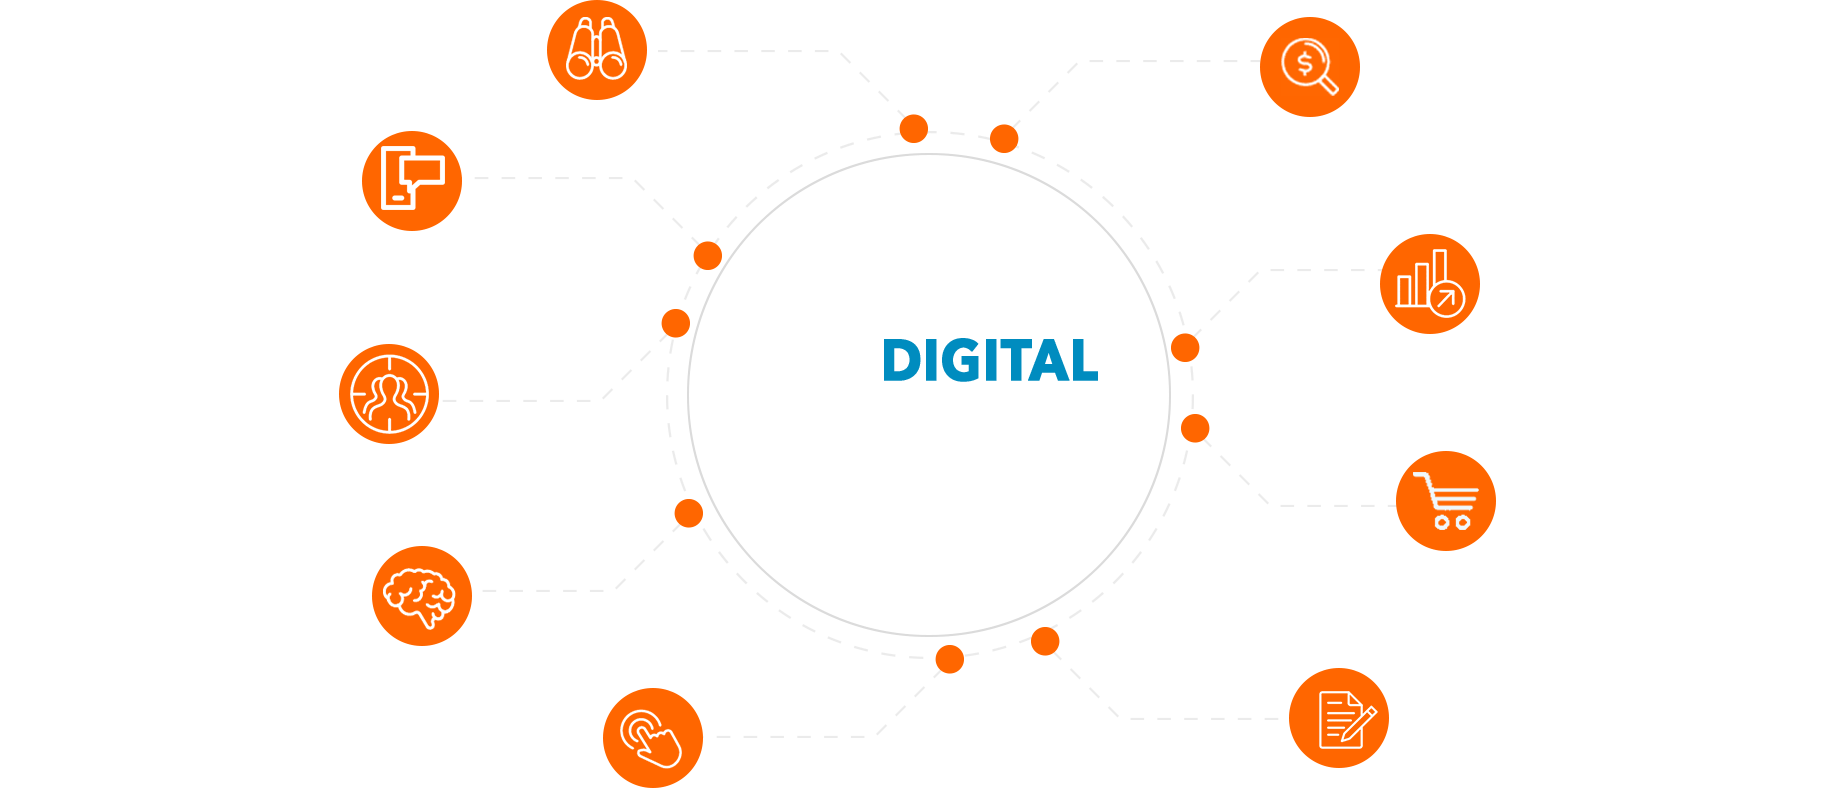 Solutions Digitales : Co-sponsoring, MediaBuying, Emailing, Bulk, Leads, Co-registration, SMS, Consulting